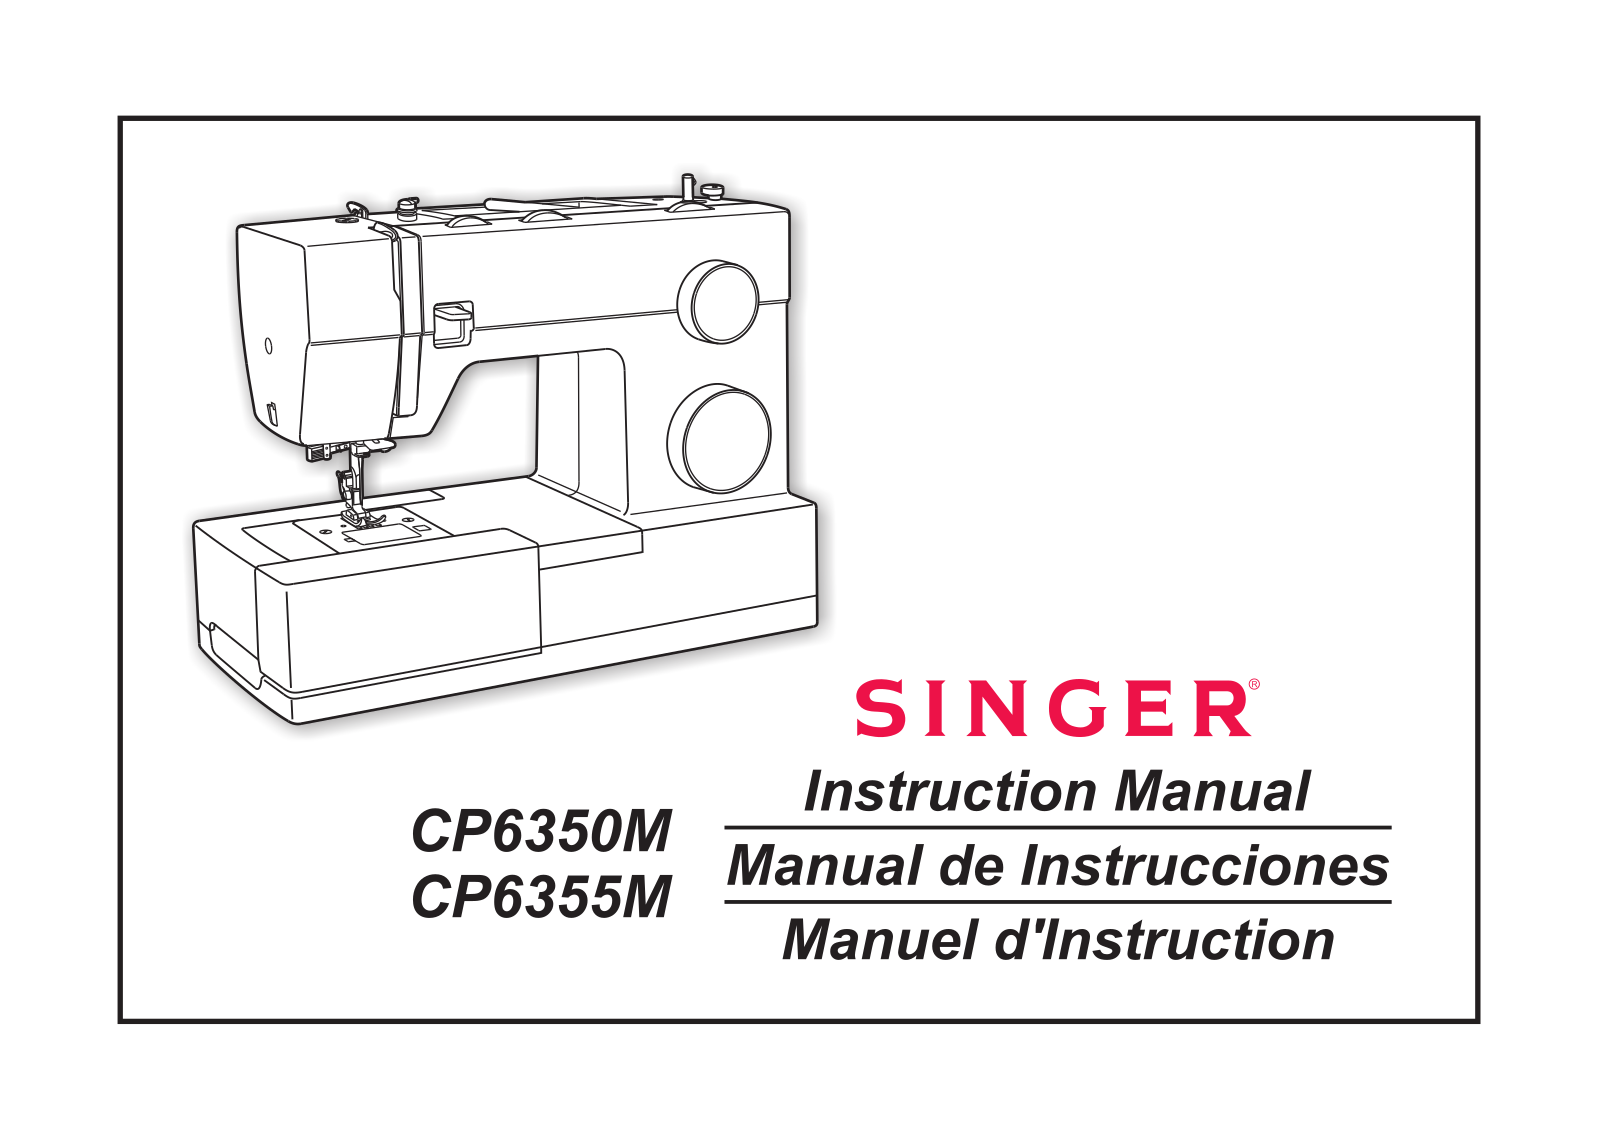 Singer CP6355M, CP6350M Instruction Manual